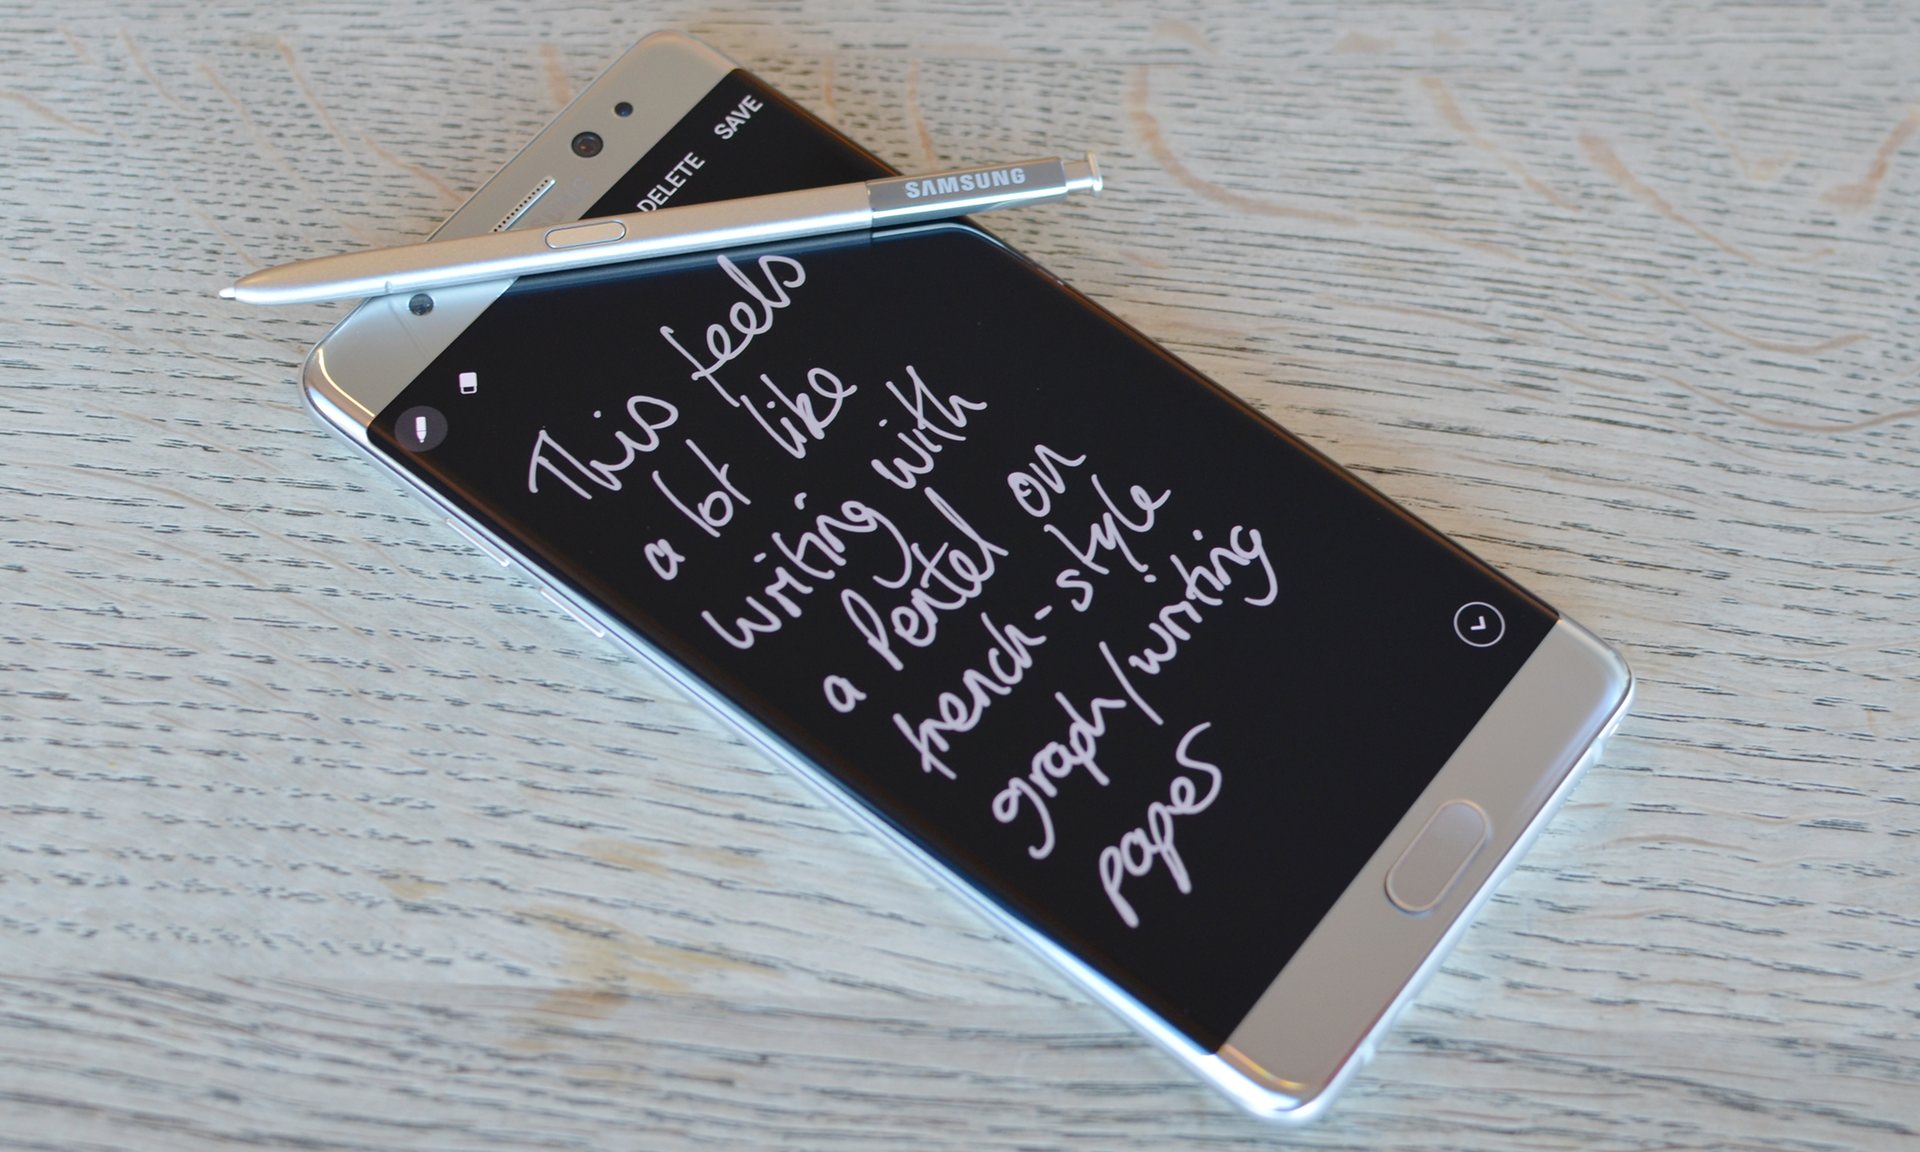  Writing short notes while the screen is off is very handy as a digital post-it note.